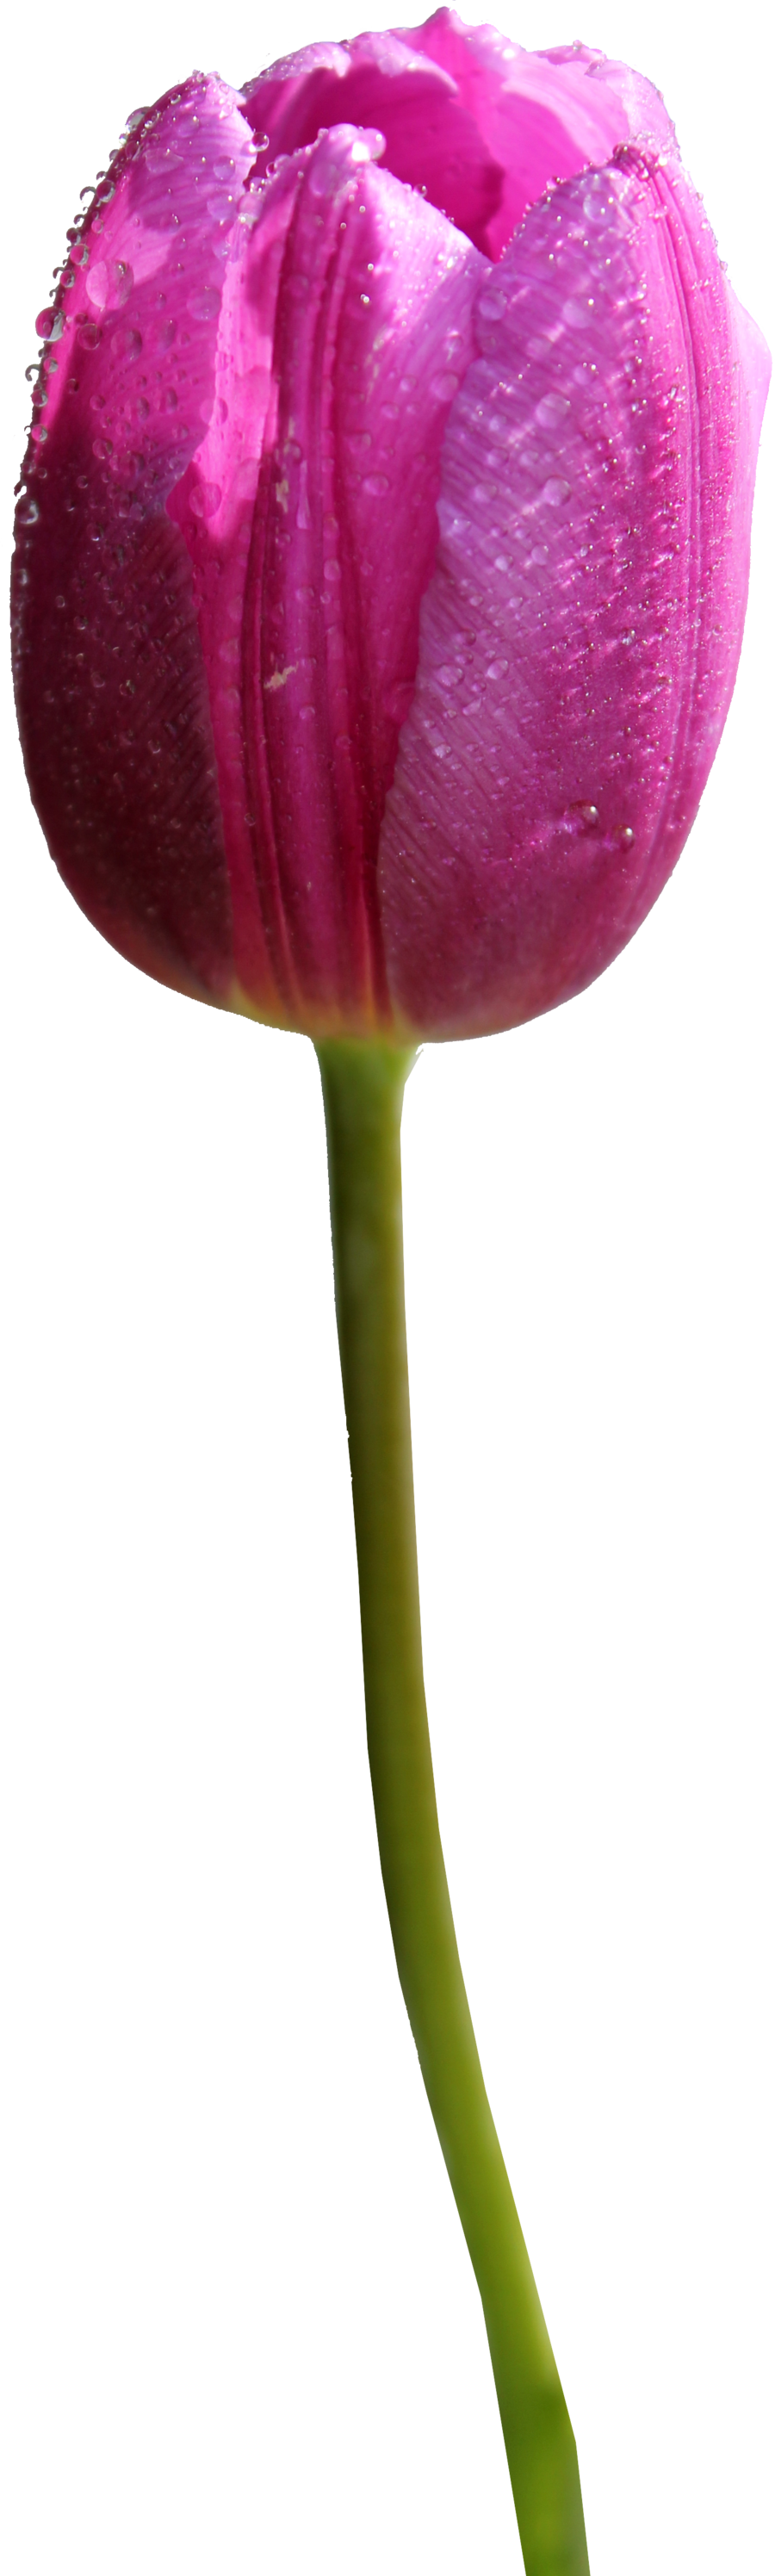 PNG HD Tulips - 152164